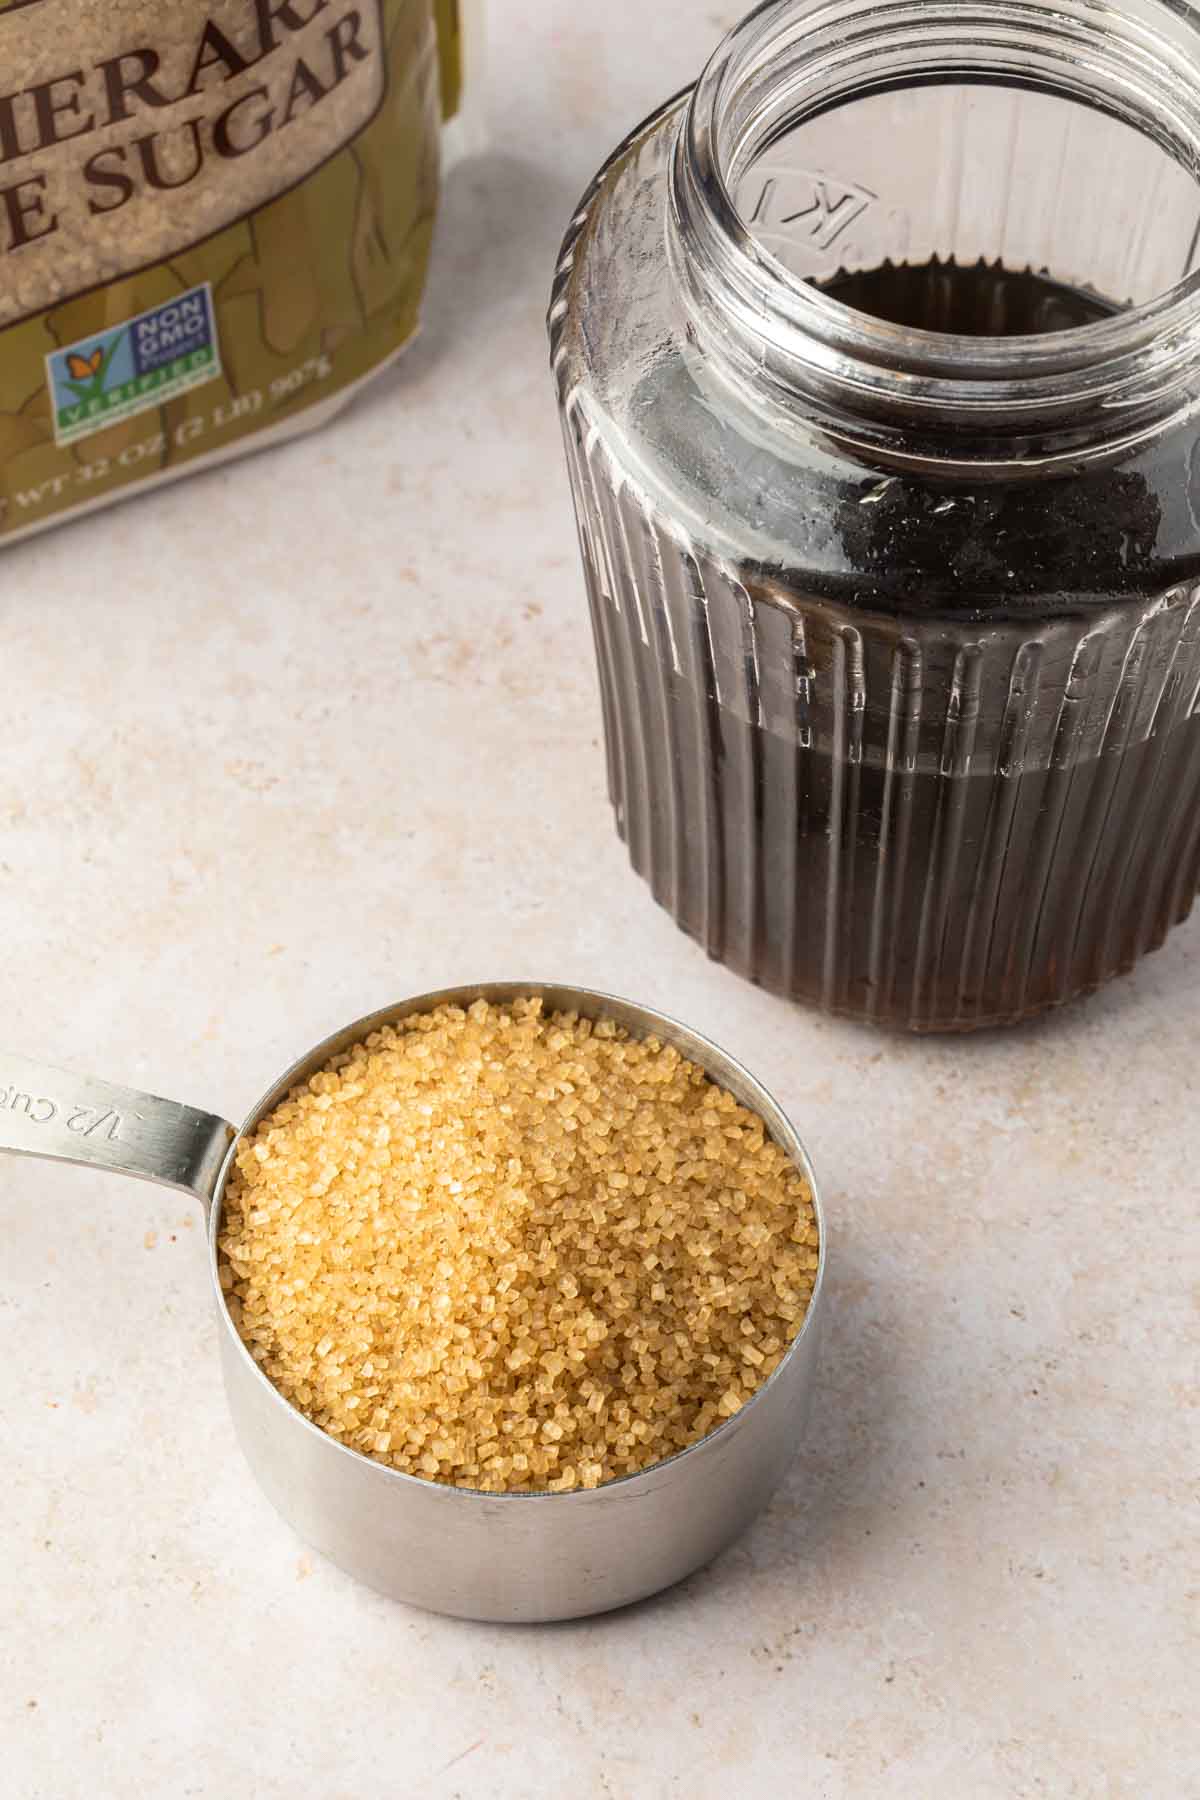 A glass bottle of demerara syrup with a measuring cup of demerara sugar and a bag of the sugar next to it. 